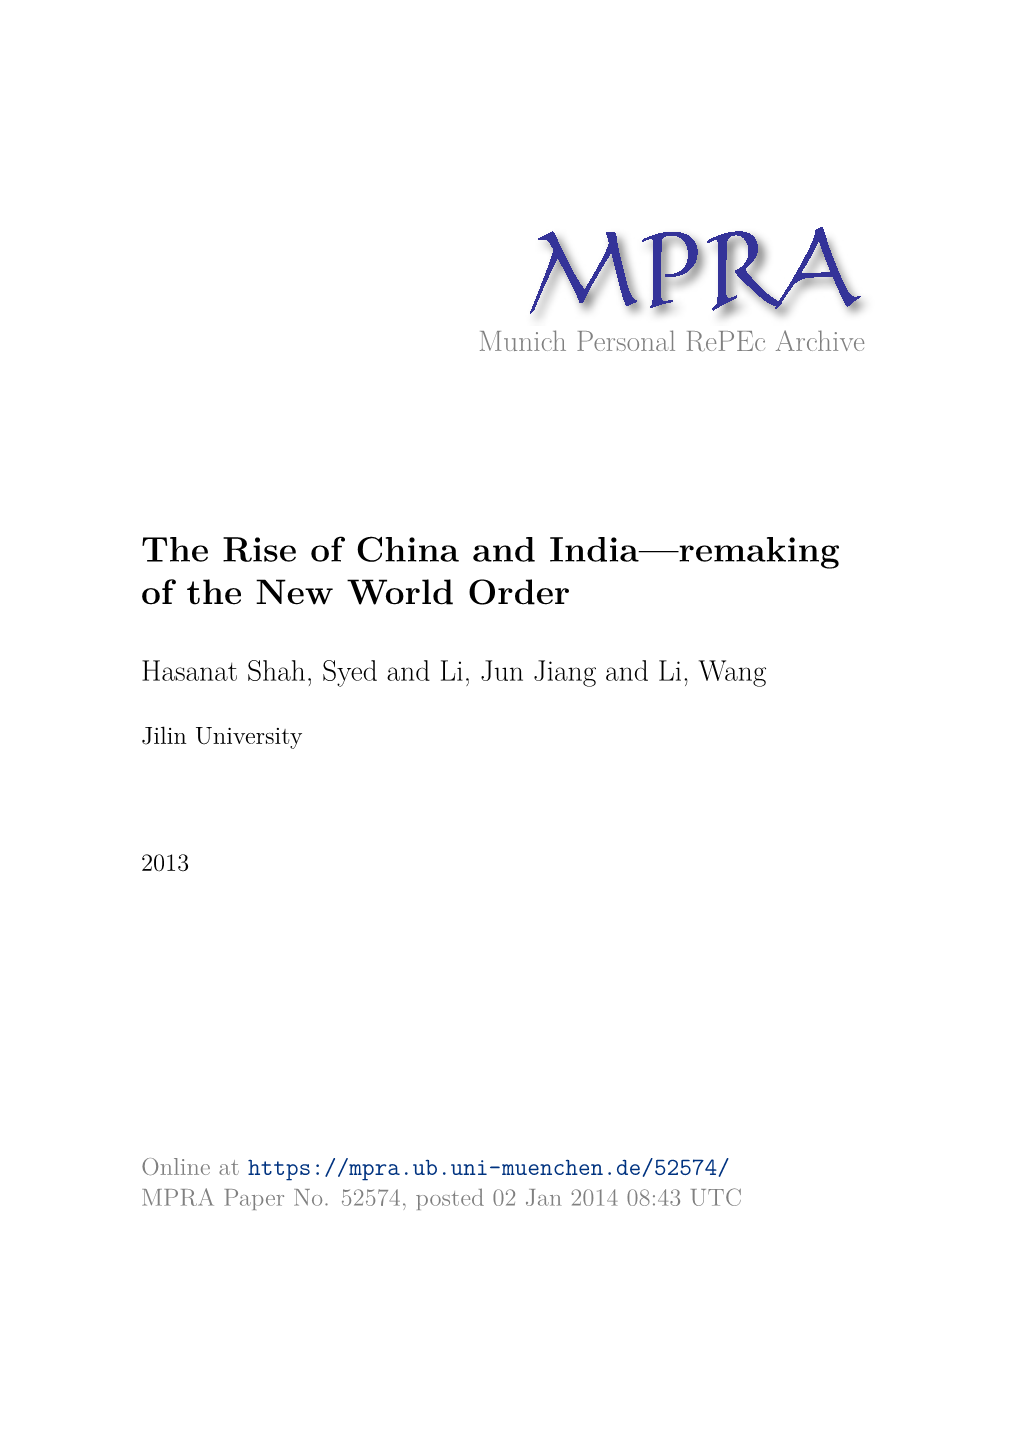 The Rise of China and India—Remaking of the New World Order